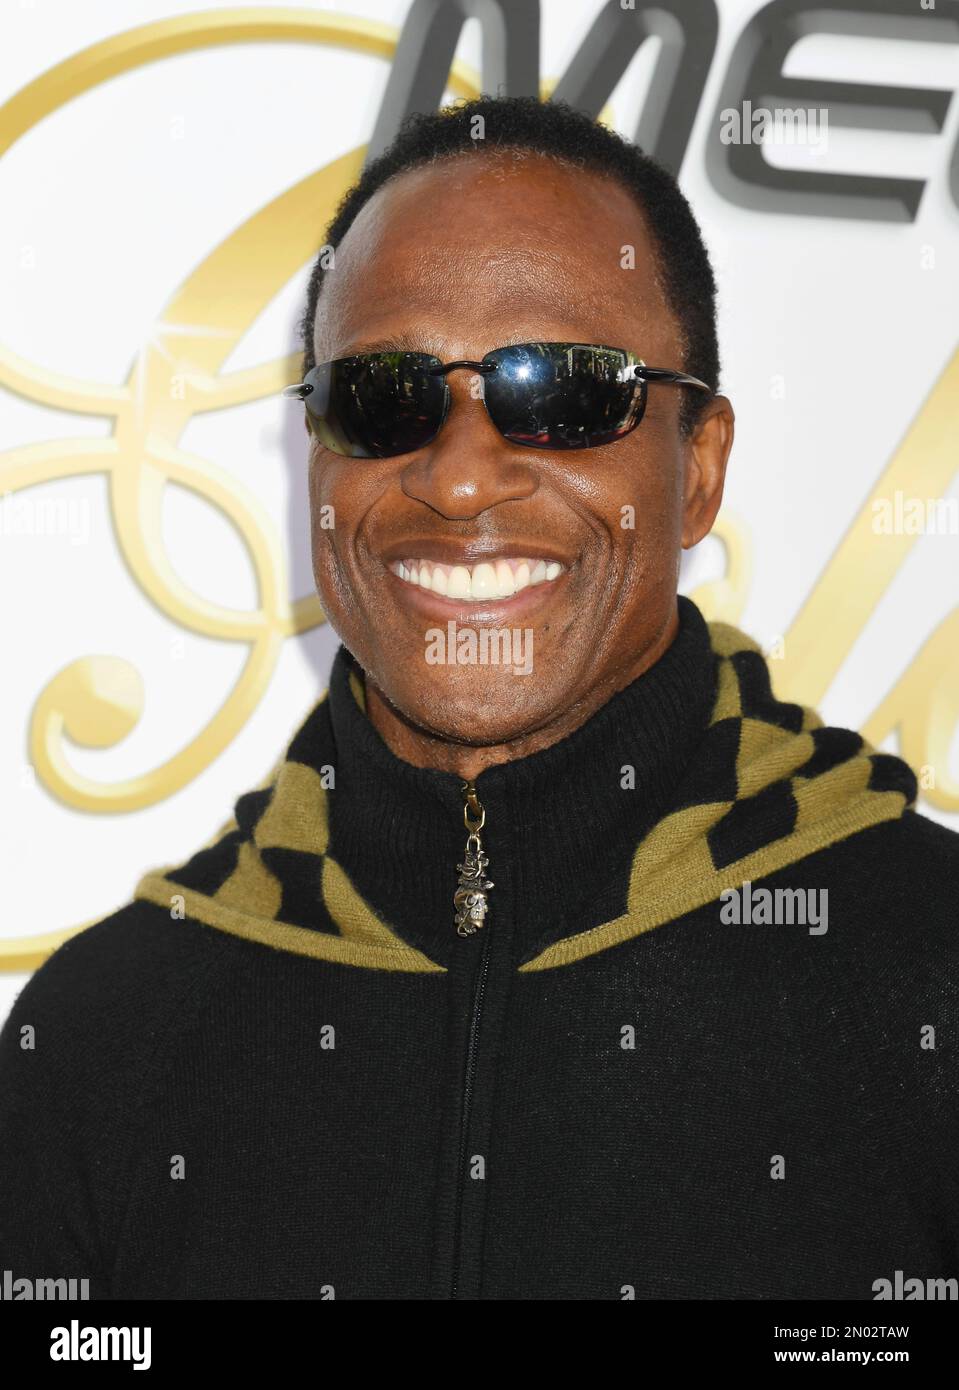 Willie gault hi-res stock photography and images - Alamy